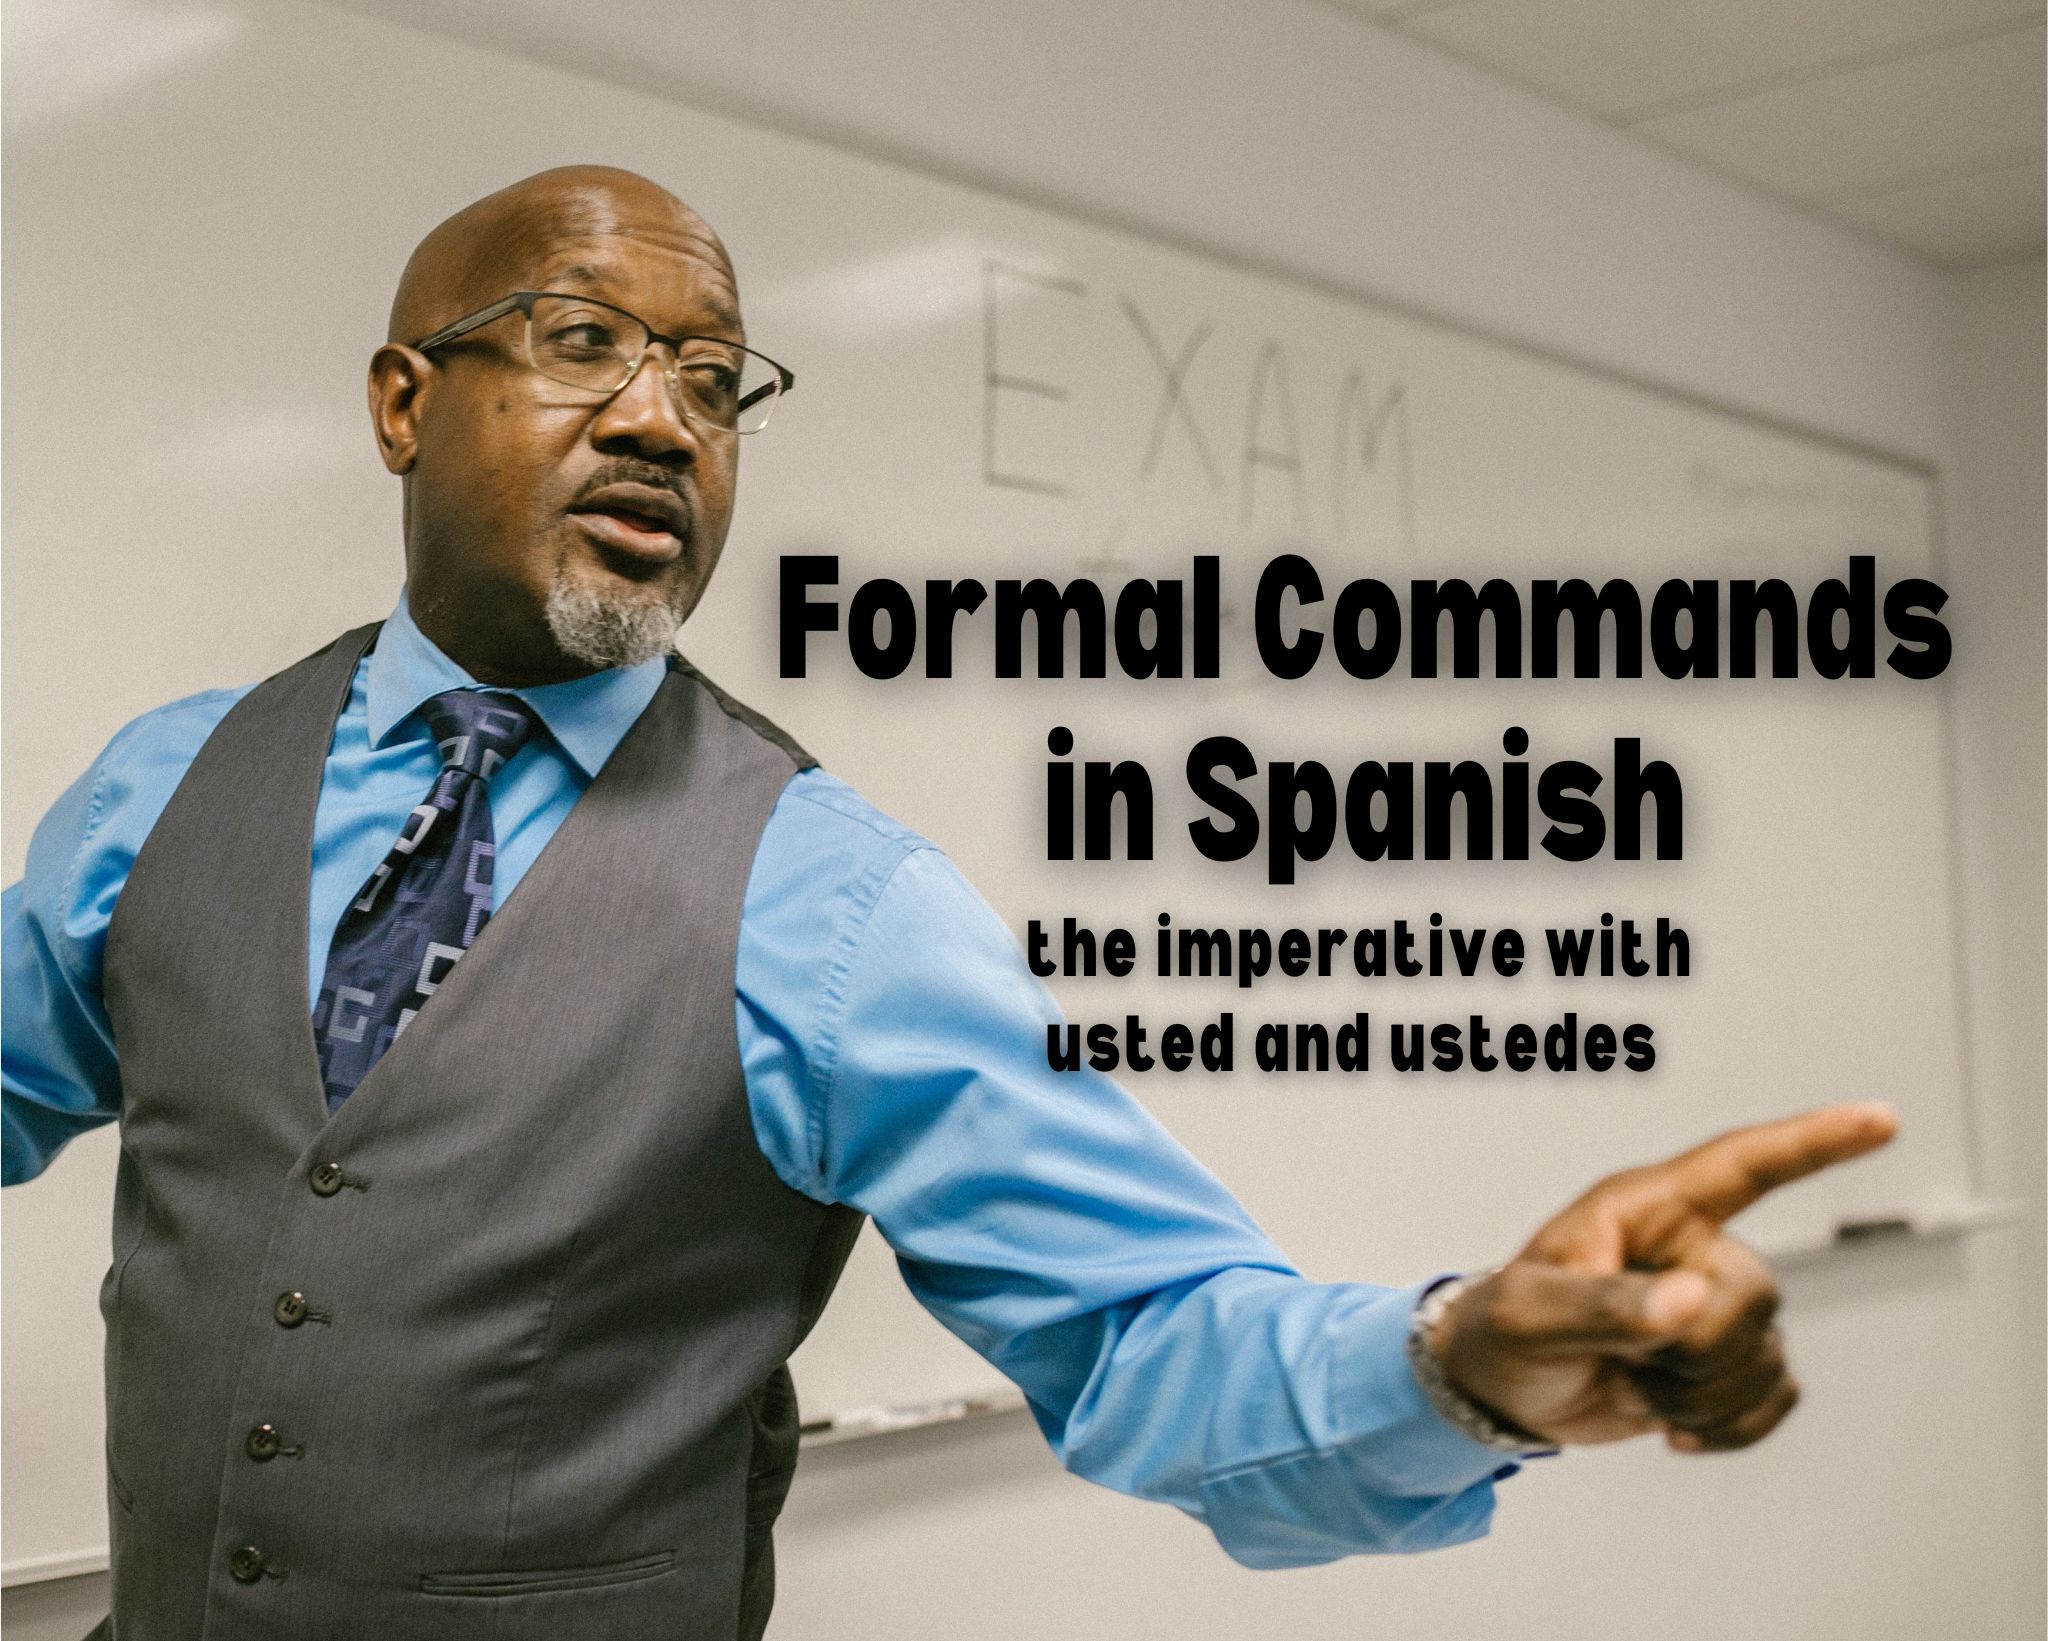 Formal Commands in Spanish: The imperative with Usted and Ustedes